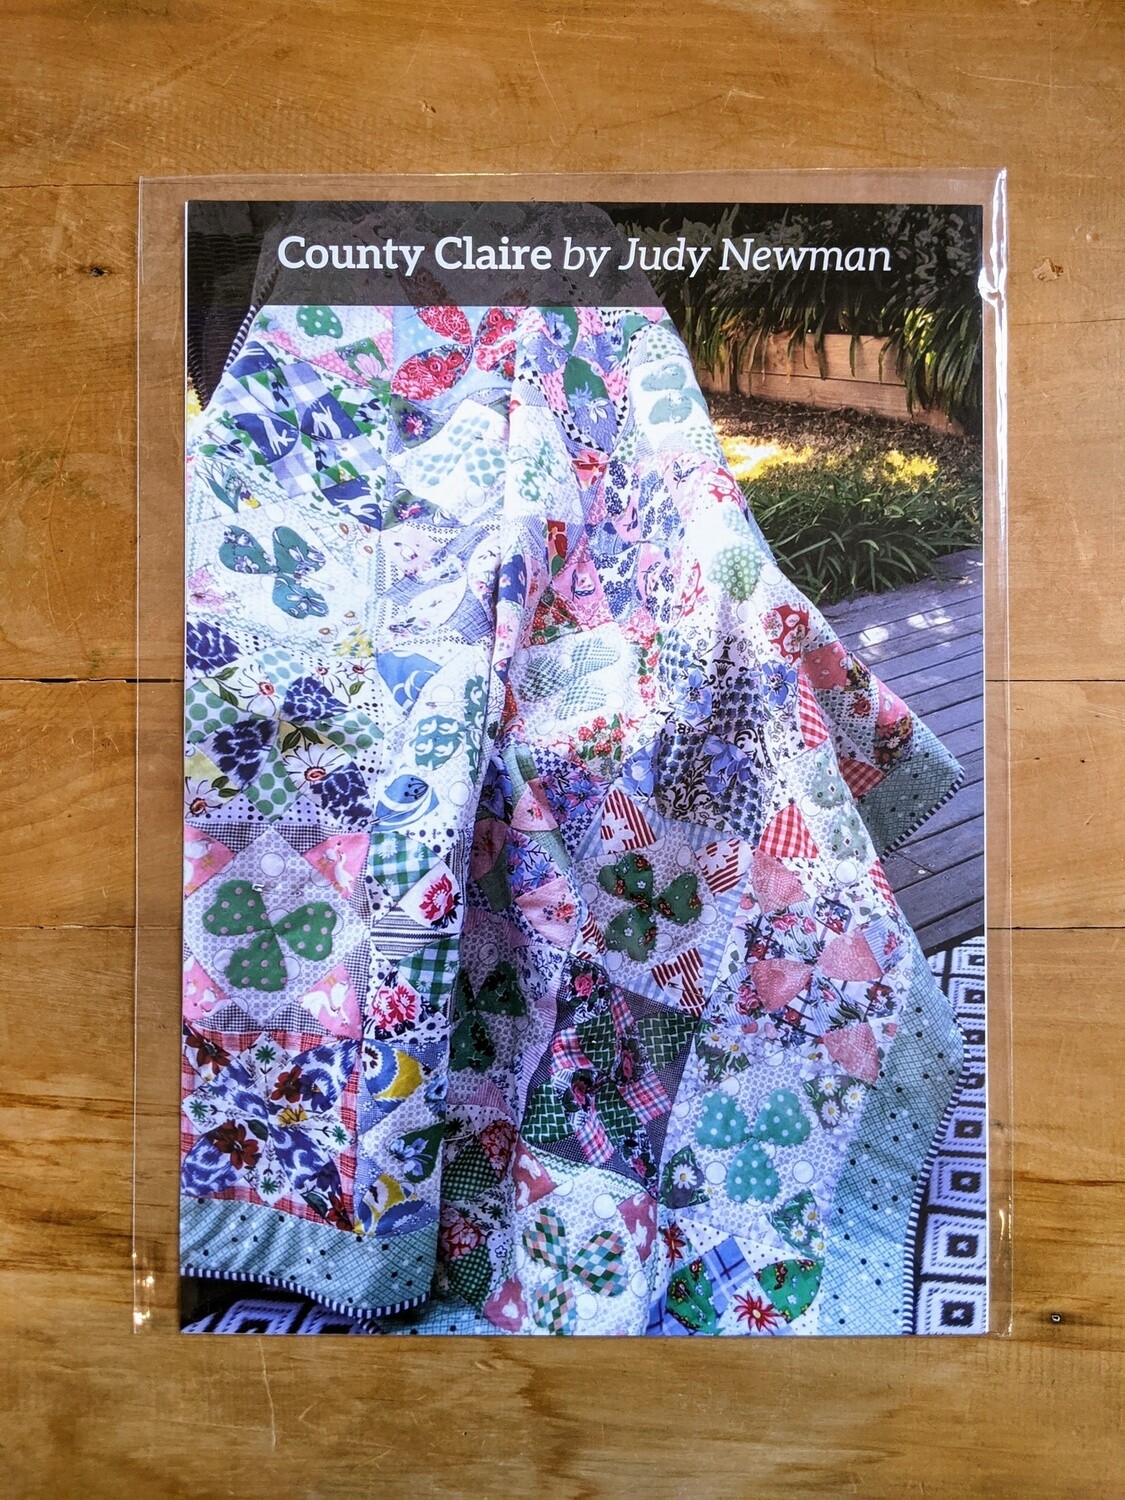 County Claire by Judy Newman